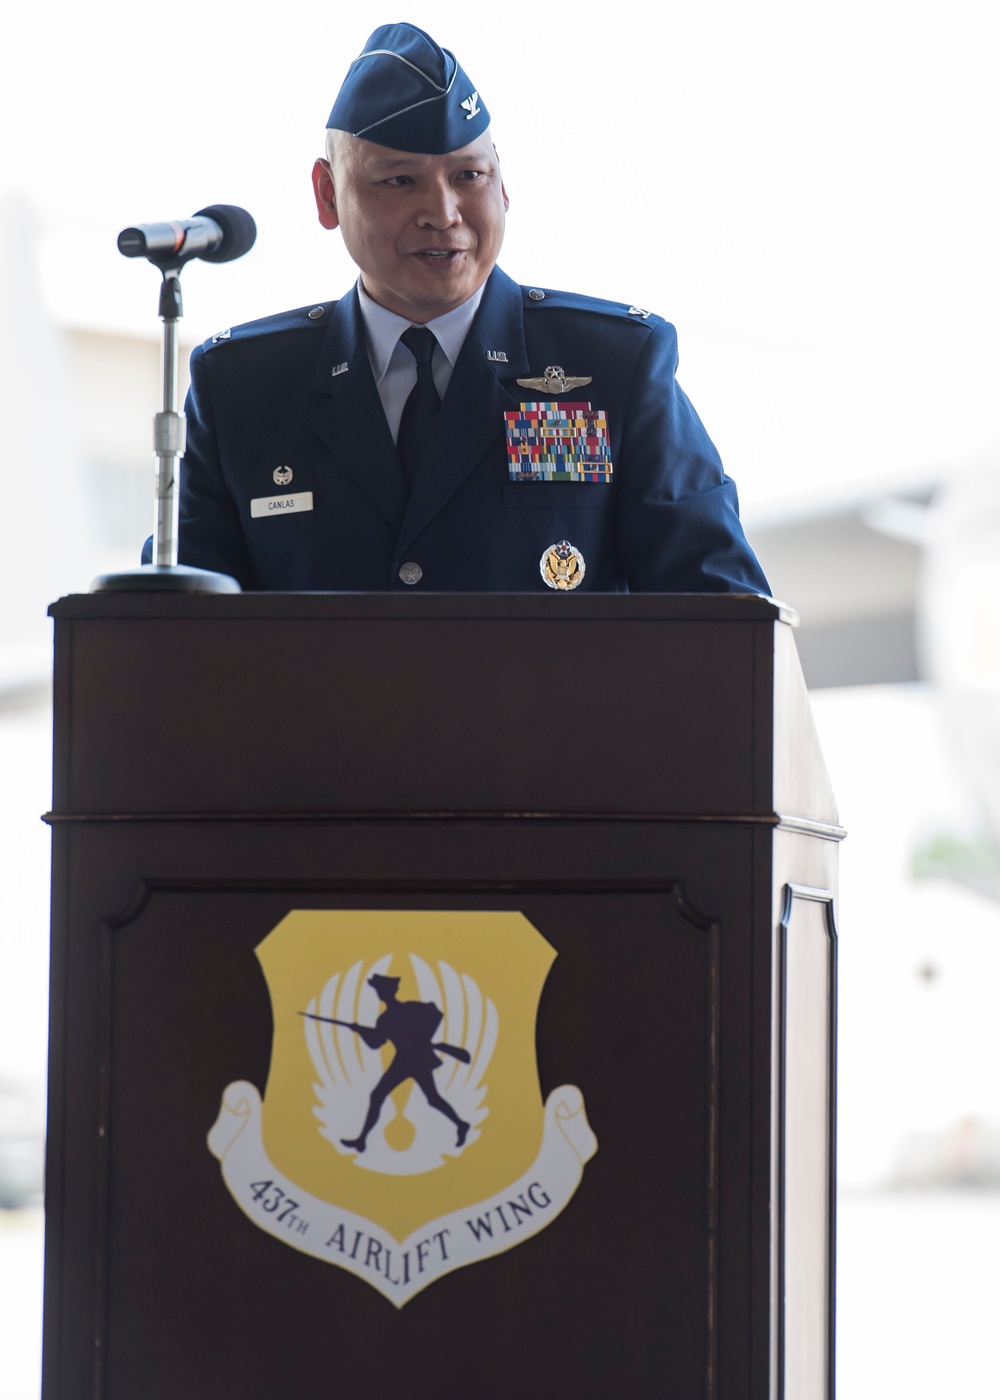 437th Airlift Wing Change of Command